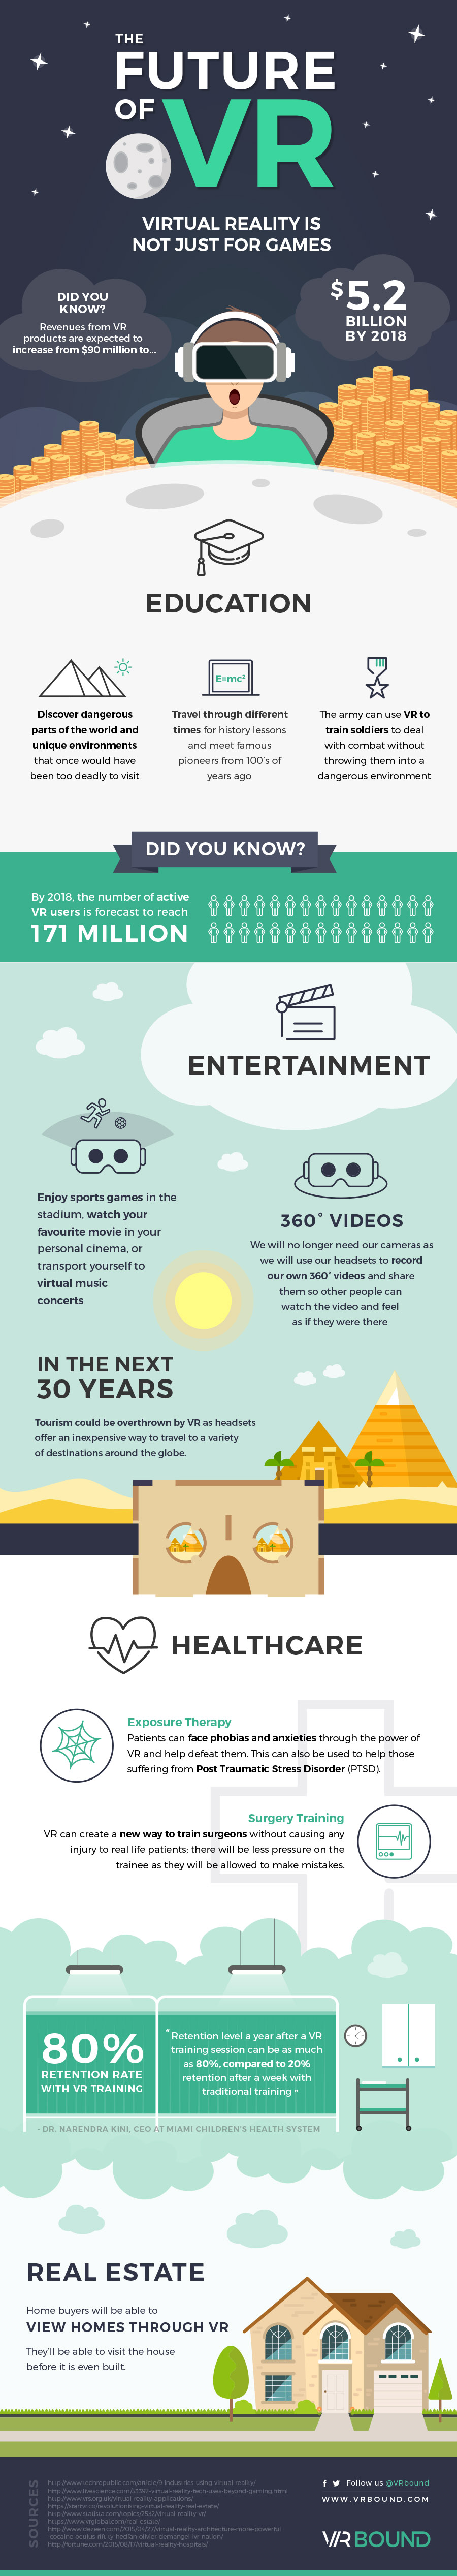 The Future of VR Infographic - 2